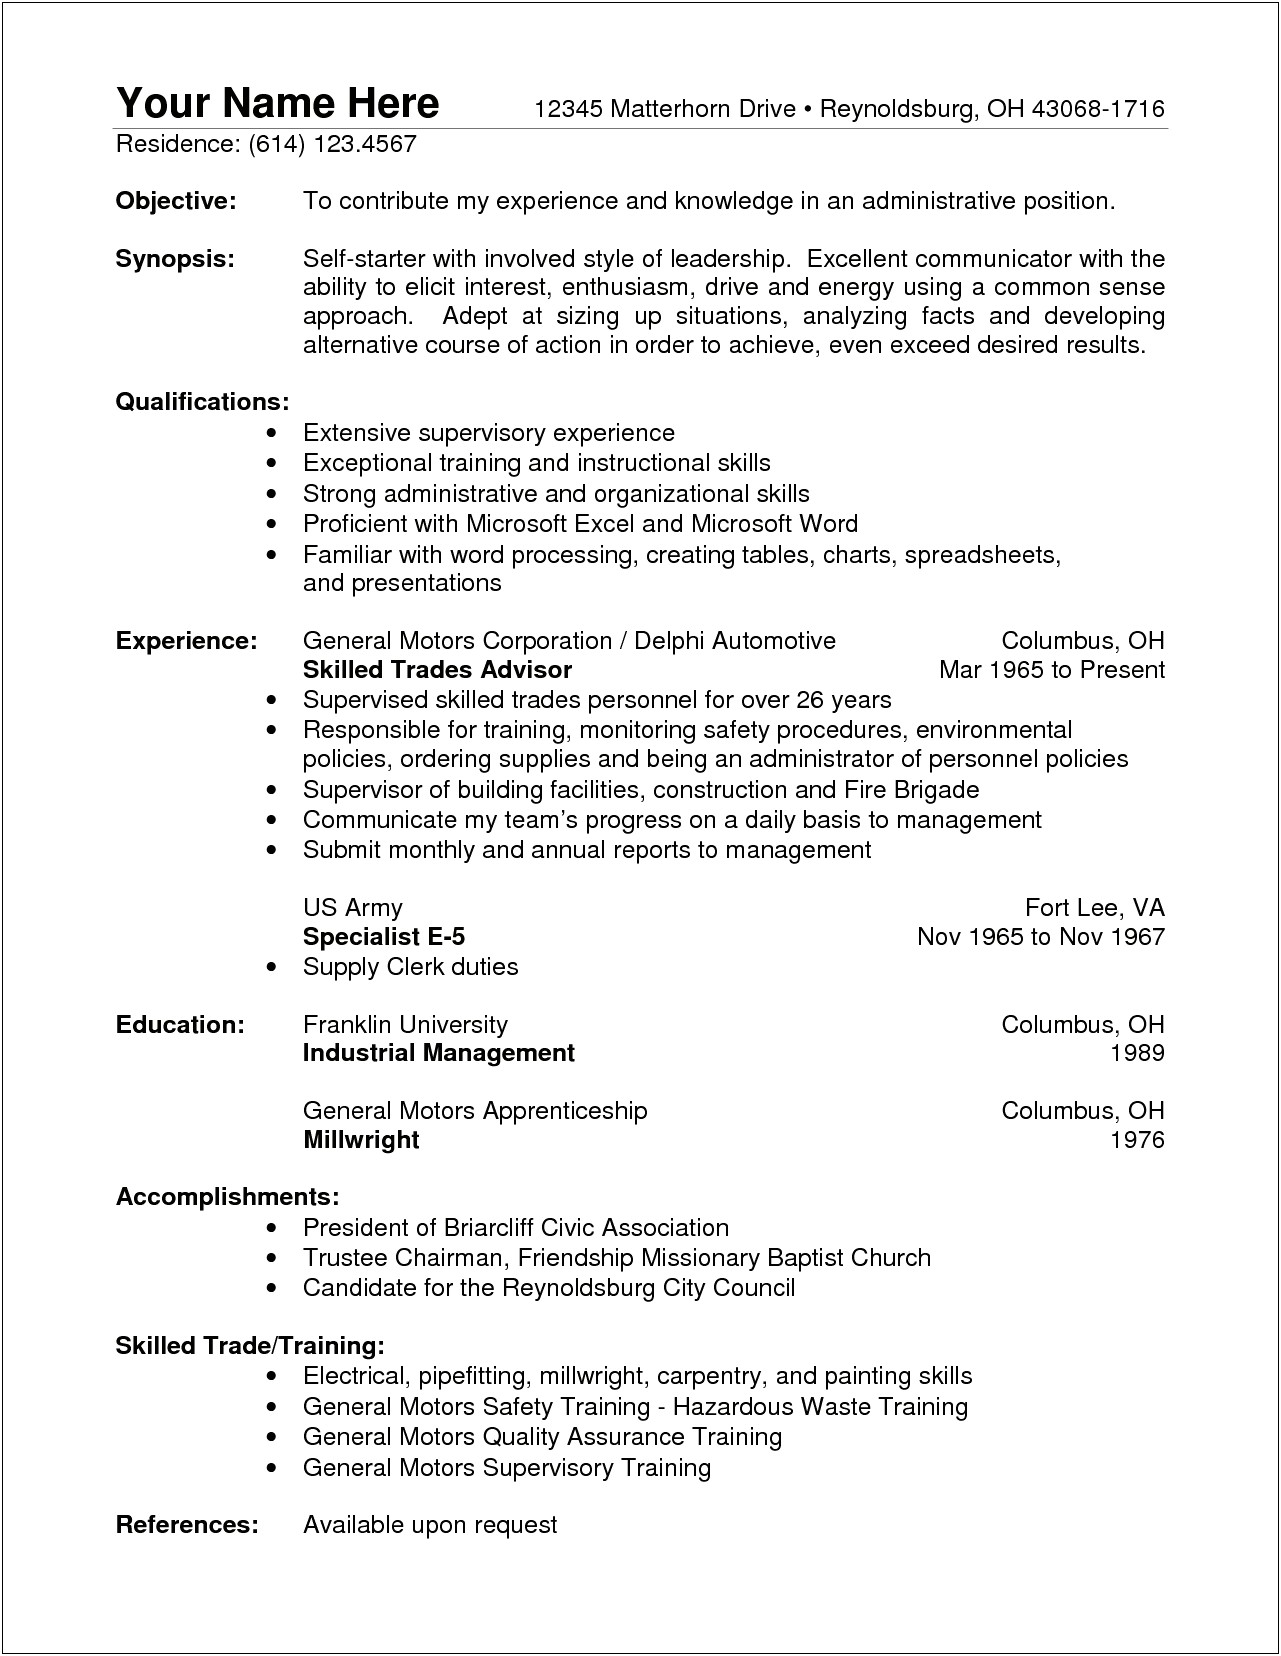 Resume Objective Examples Indeed.com